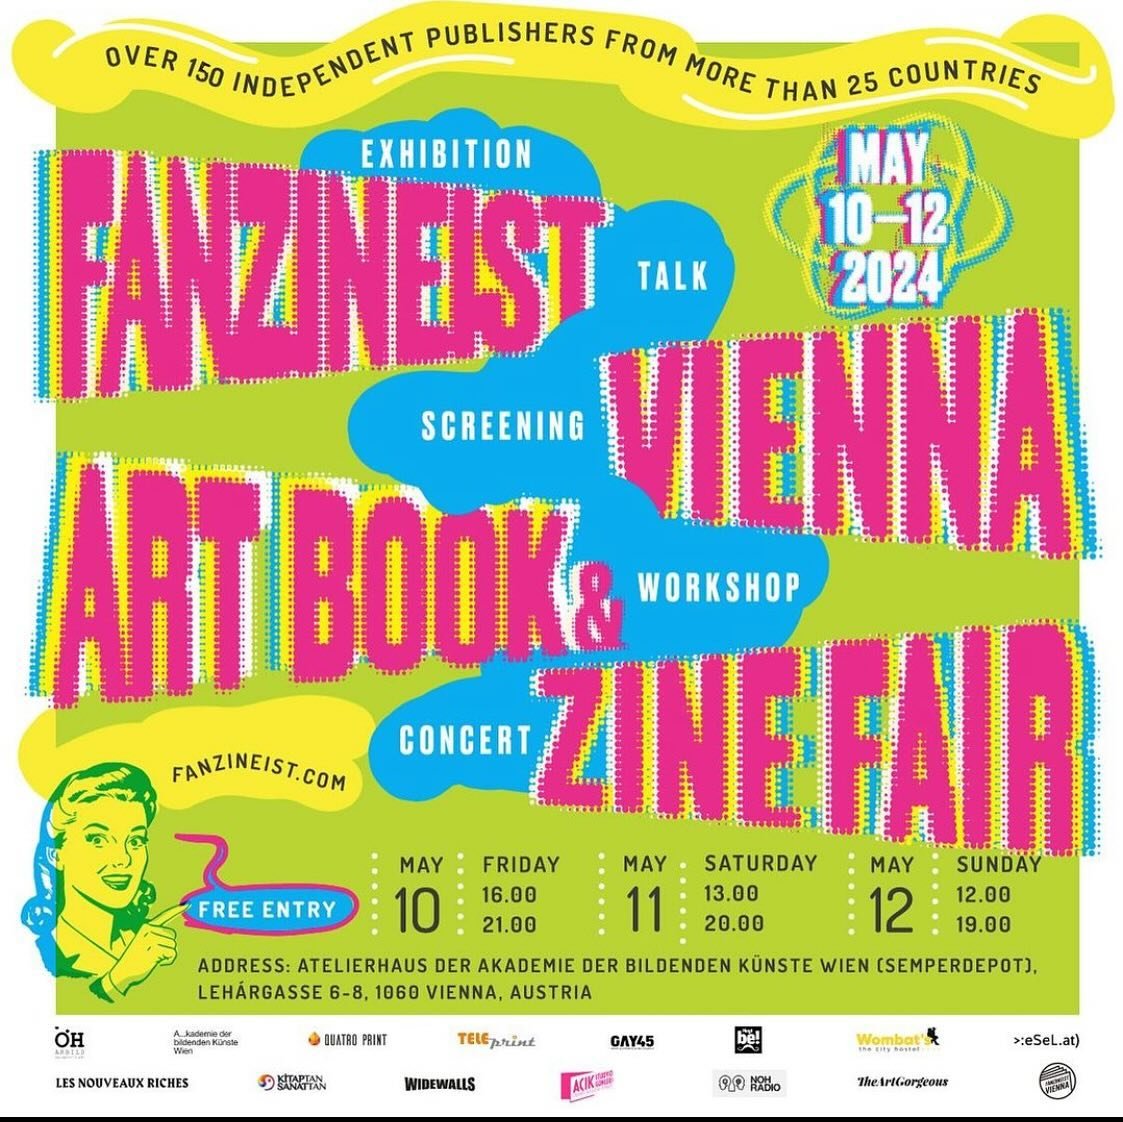 My book &lsquo;15, 754 stories between two offices&rsquo; is in amazing company this weekend at @fanzineistvienna . More info in bio 👆🏽